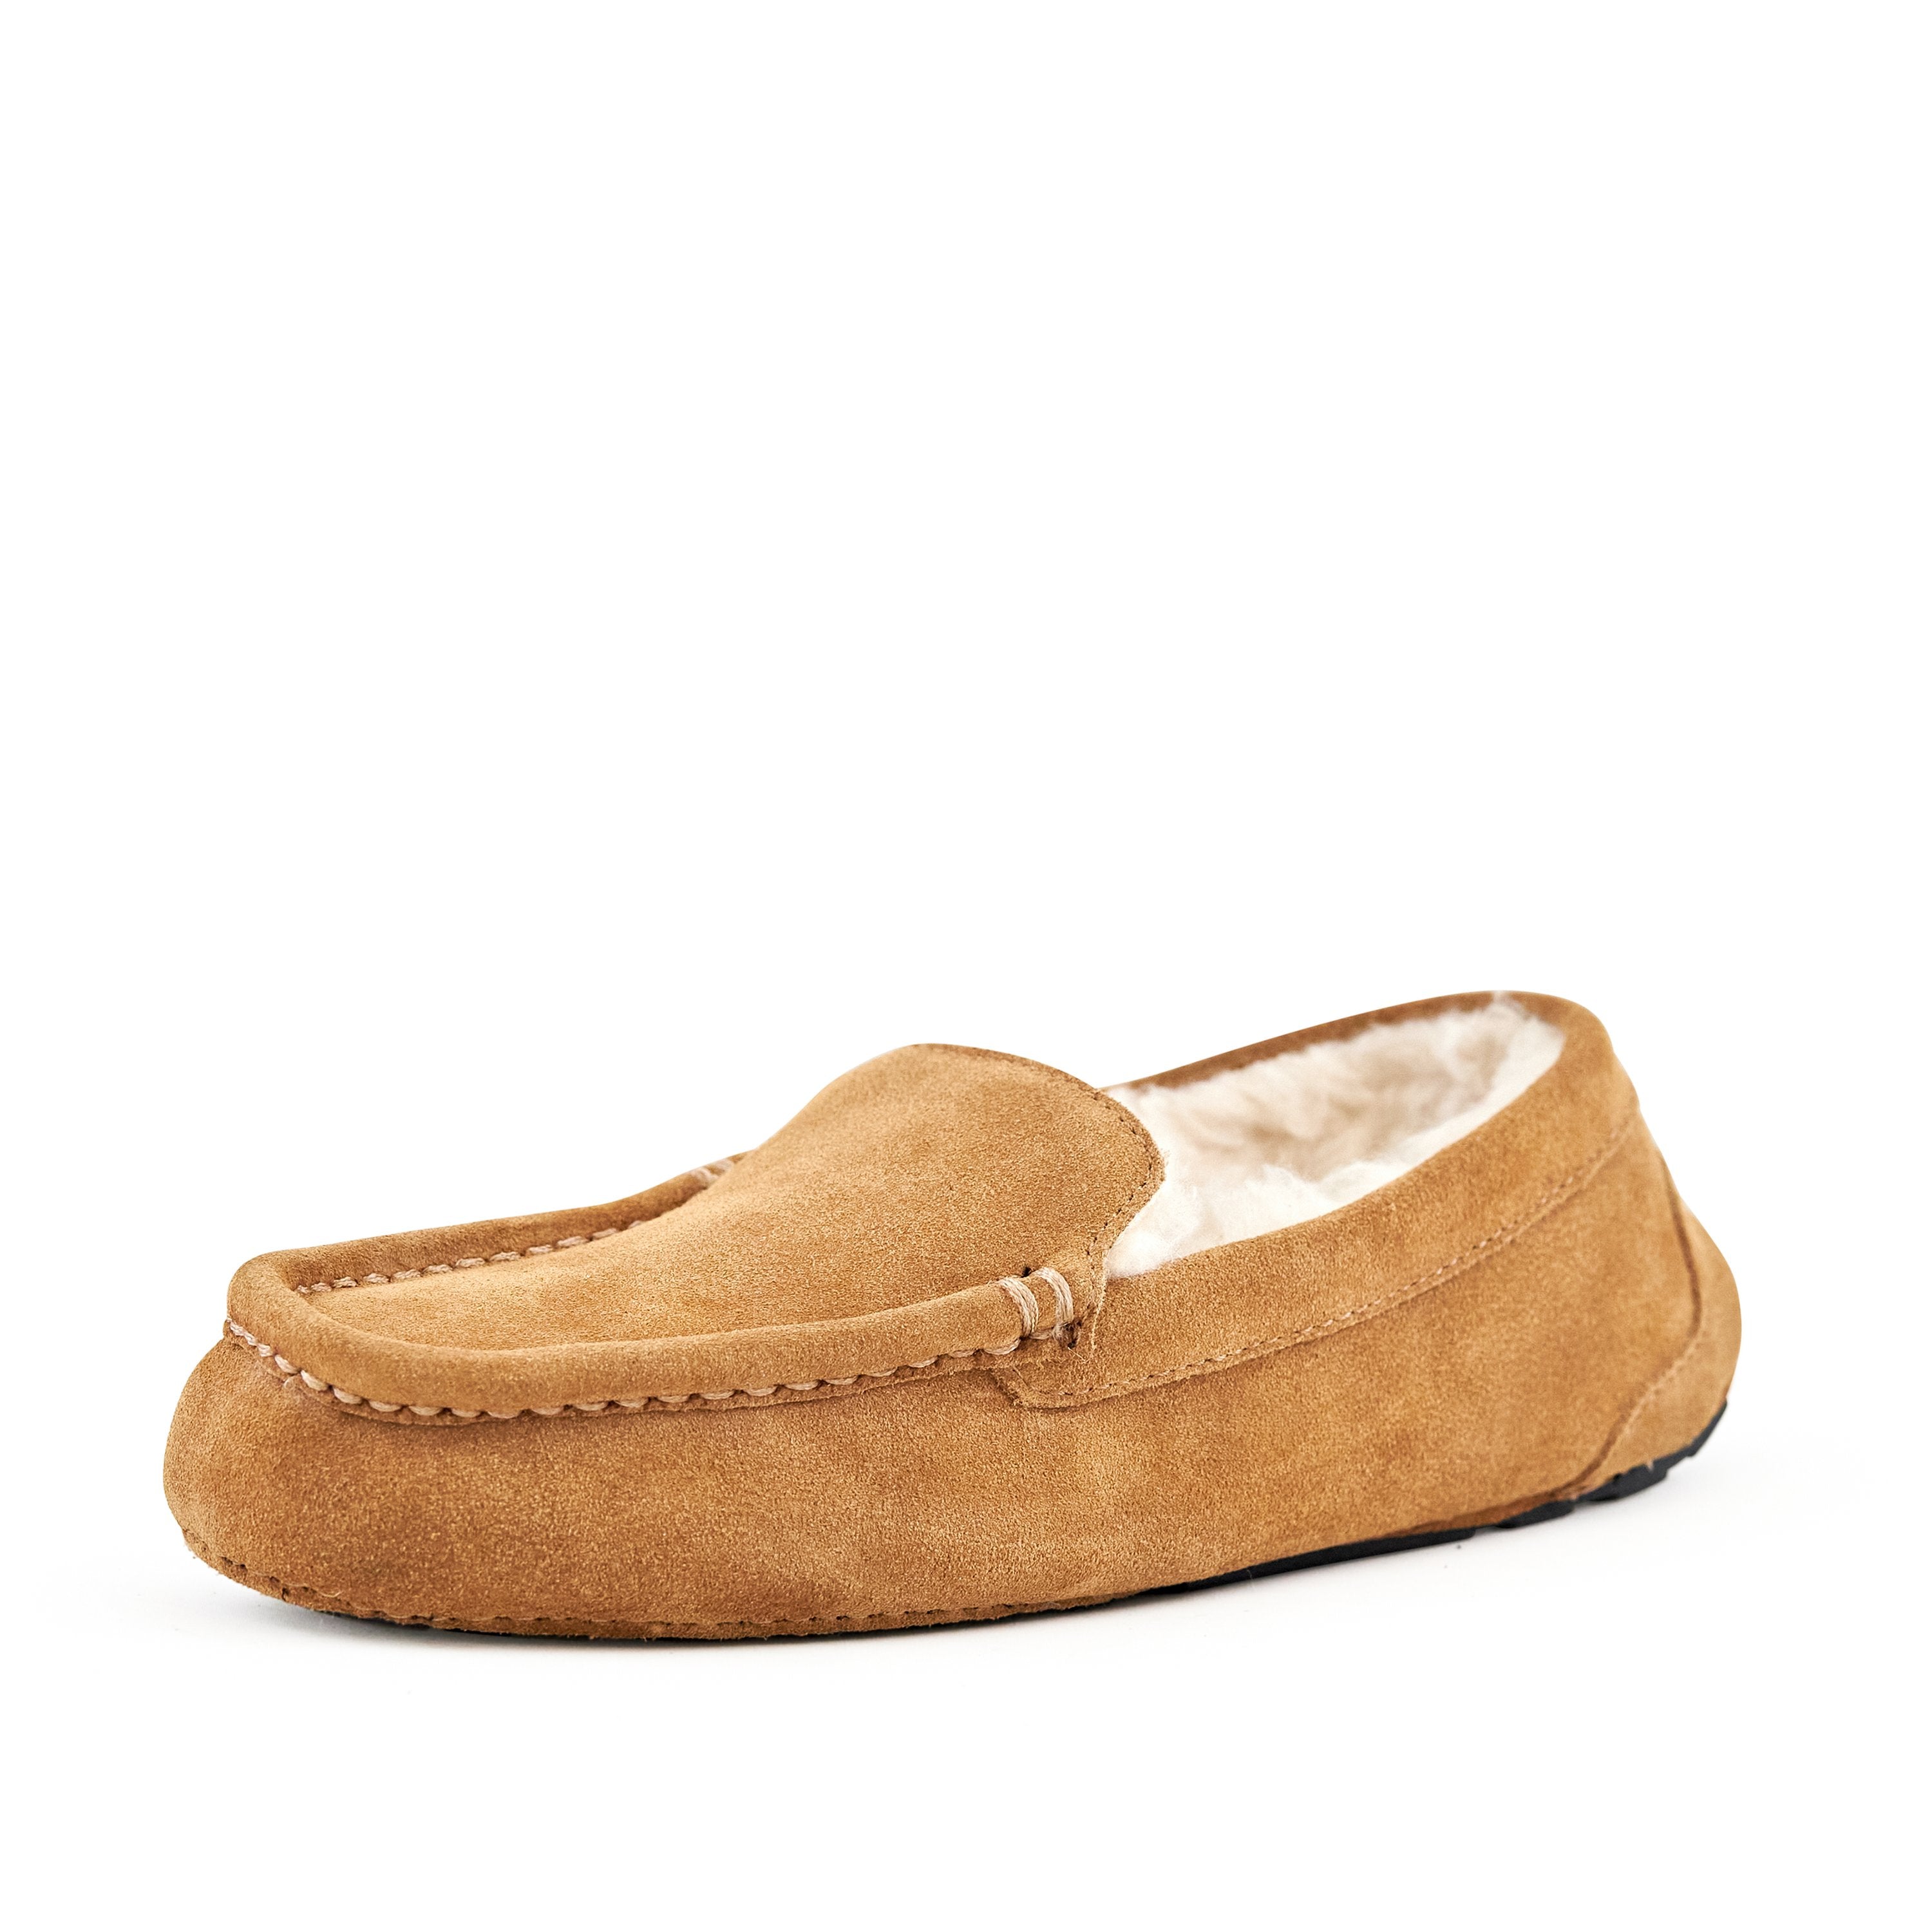 Women's Moccasin Slippers Toasty Camel